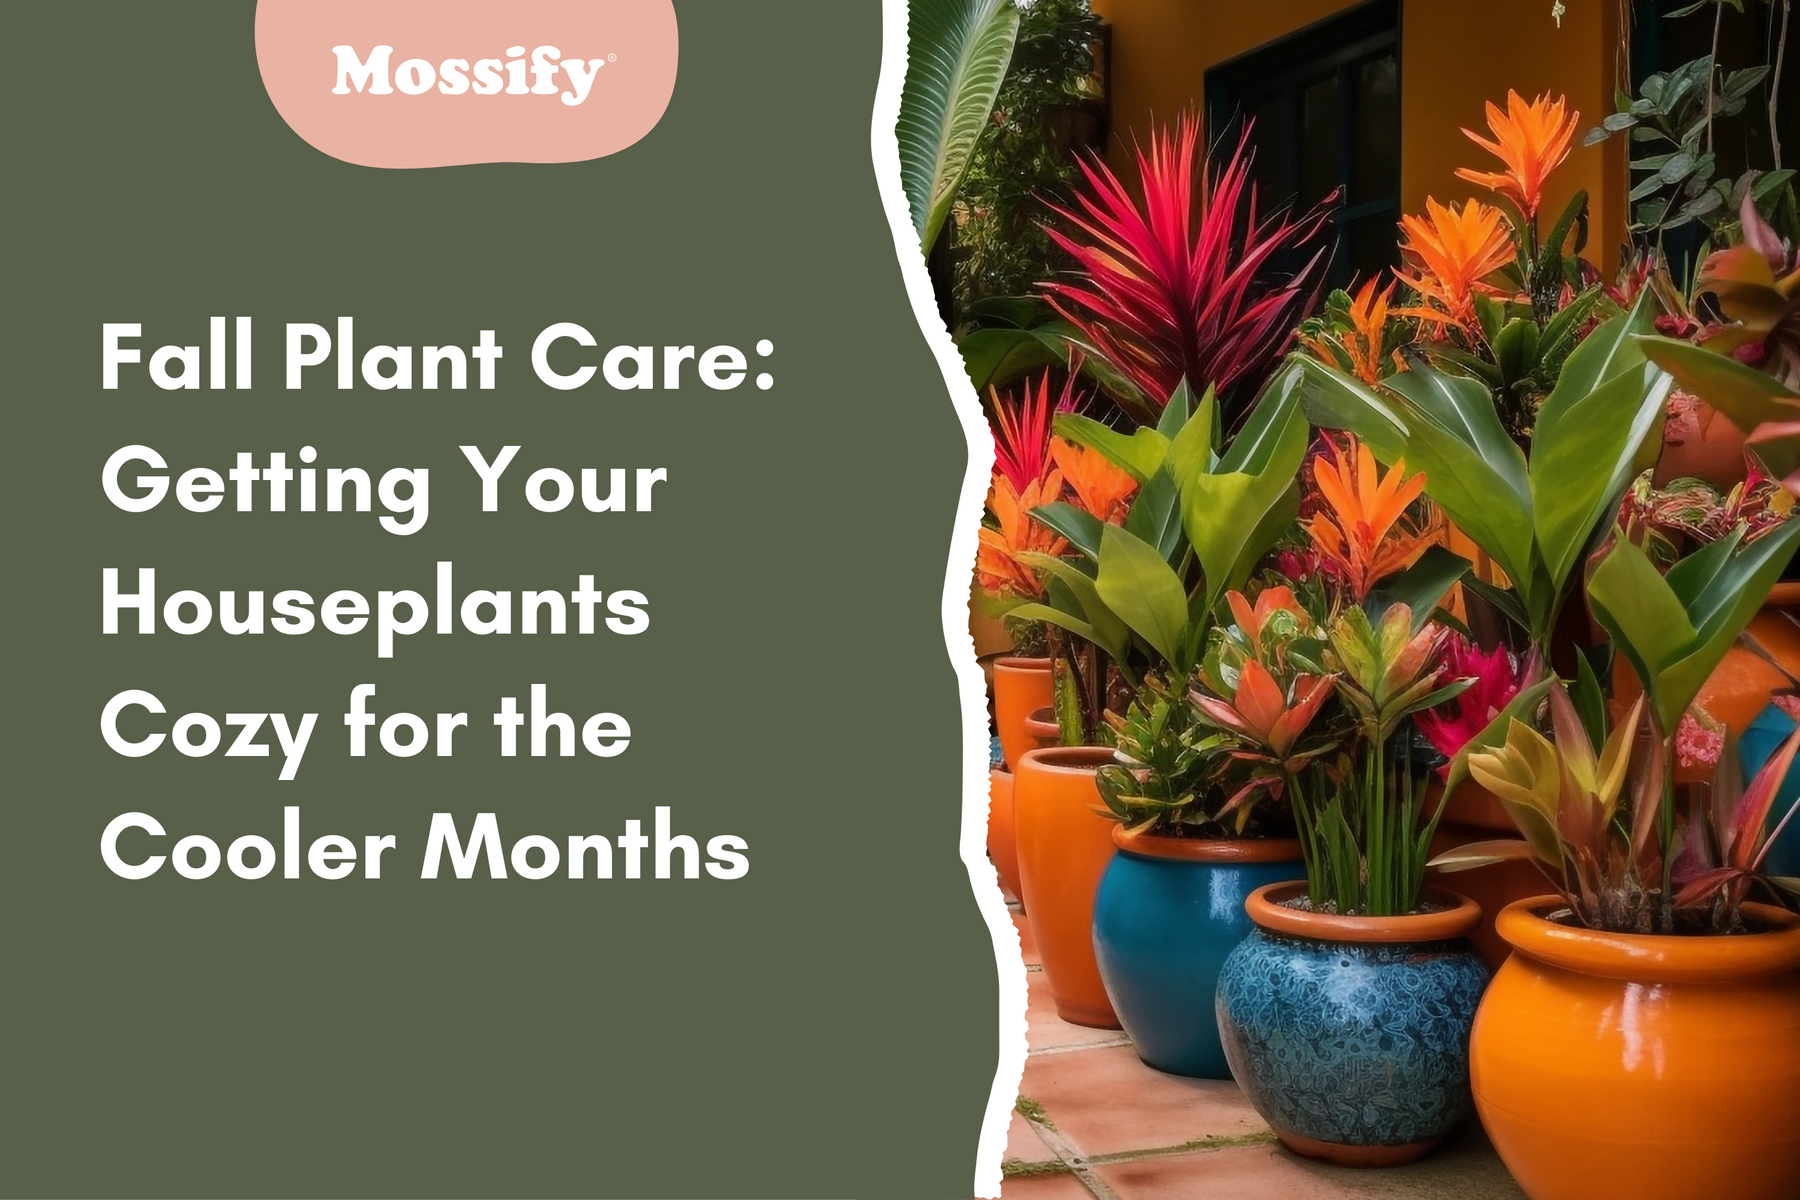 Fall Plant Care: Getting Your Houseplants Cozy for the Cooler Months